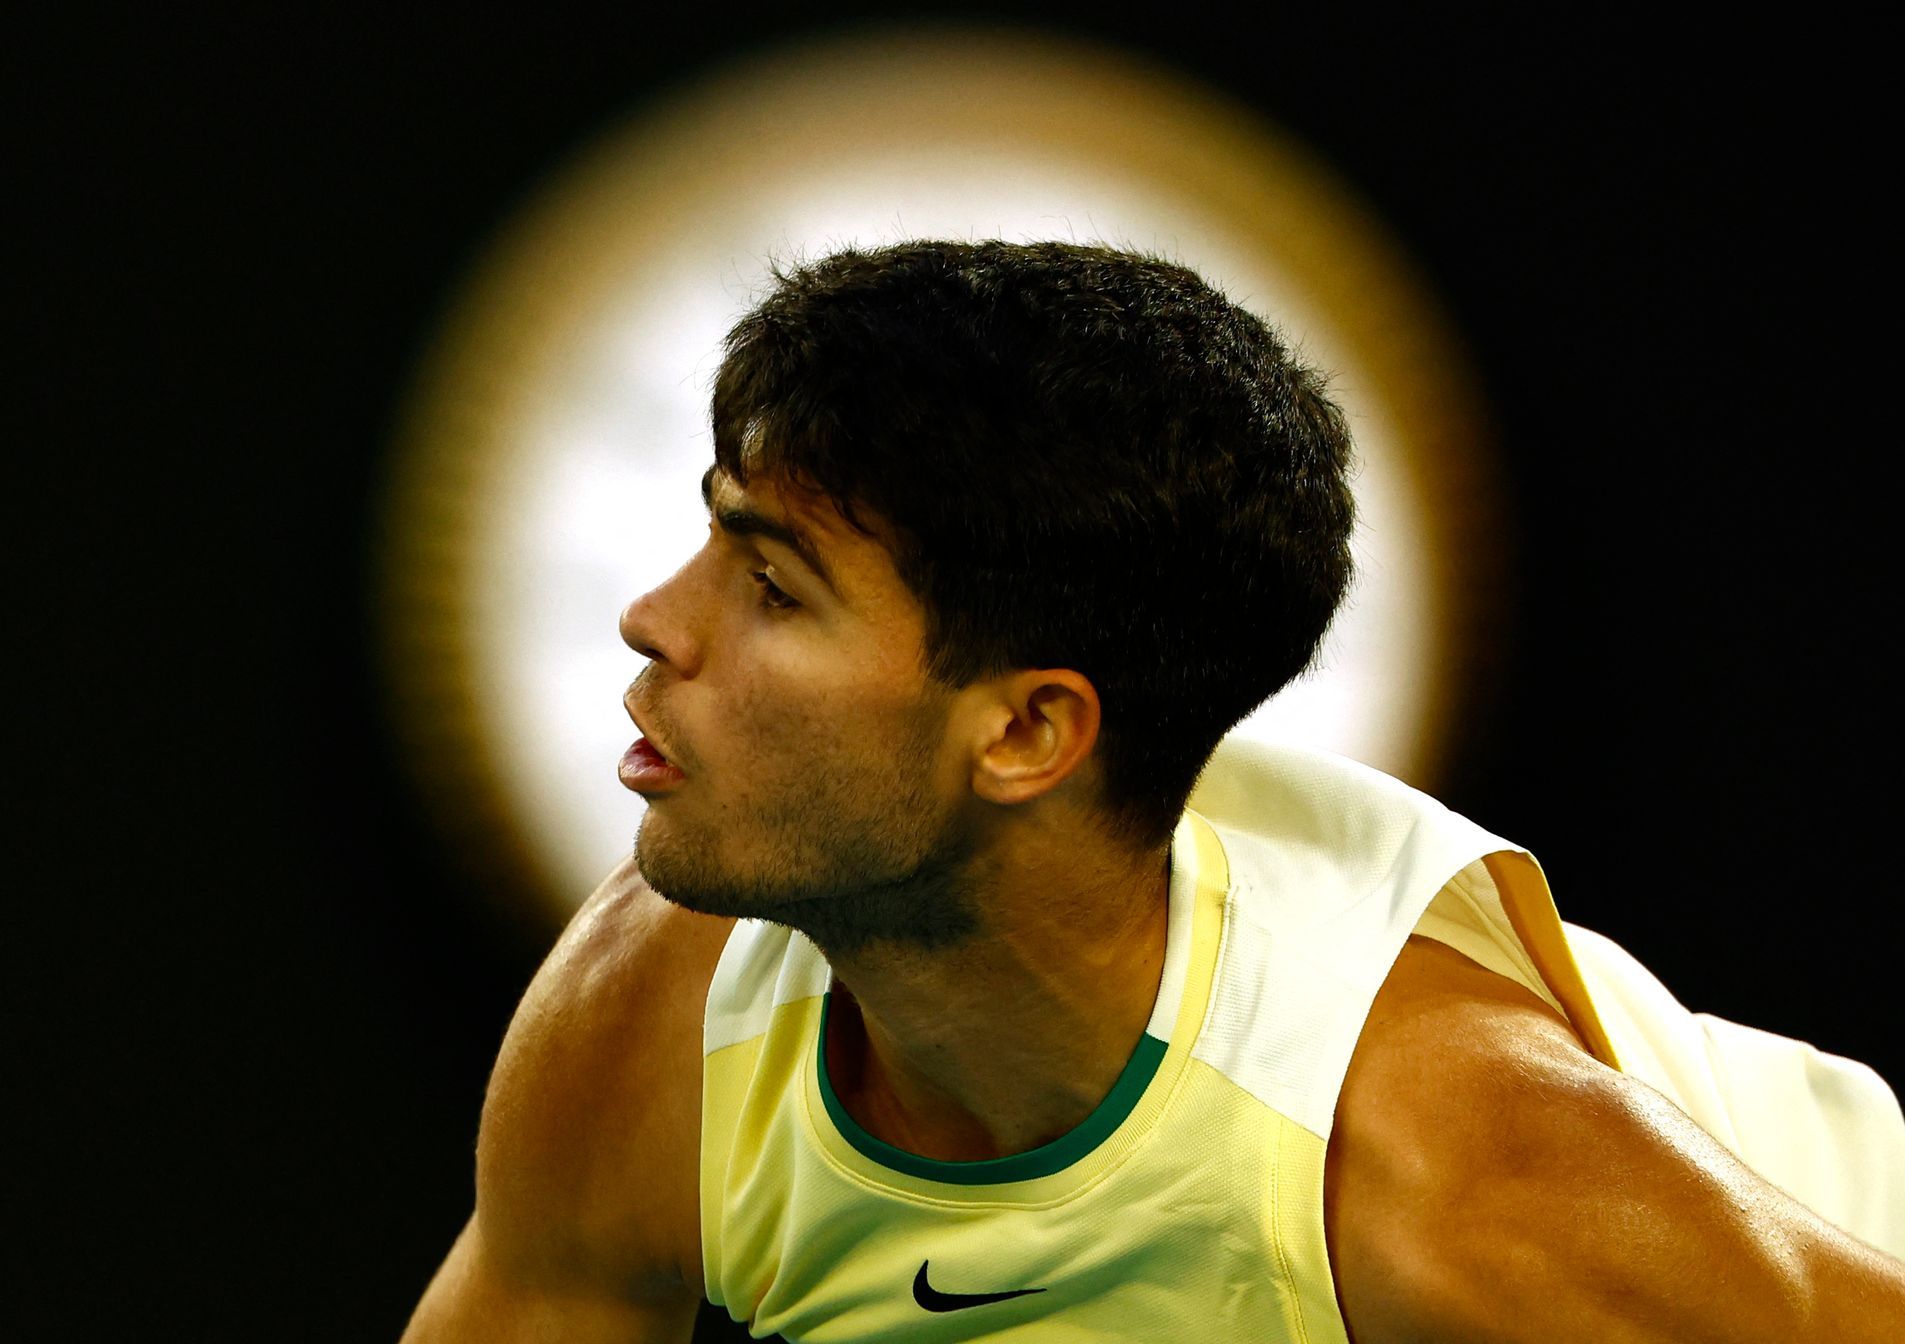 Alcaraz, the 20-year-old world number two, reaches the quarter-finals for the first time at the Australian Open